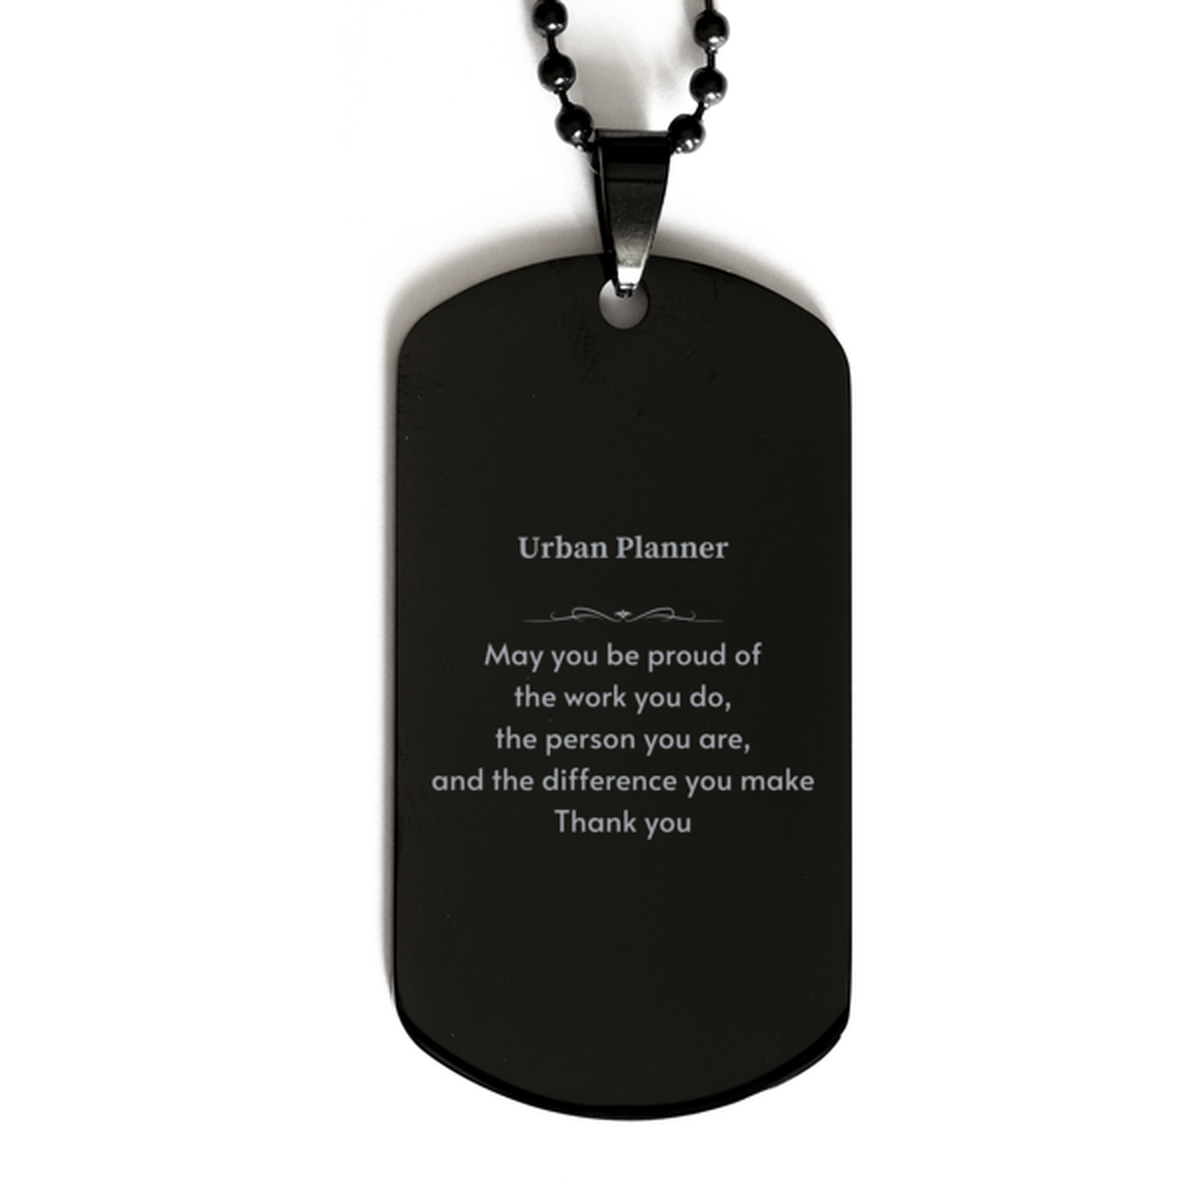 Heartwarming Black Dog Tag Retirement Coworkers Gifts for Urban Planner, Urban Planner May You be proud of the work you do, the person you are Gifts for Boss Men Women Friends